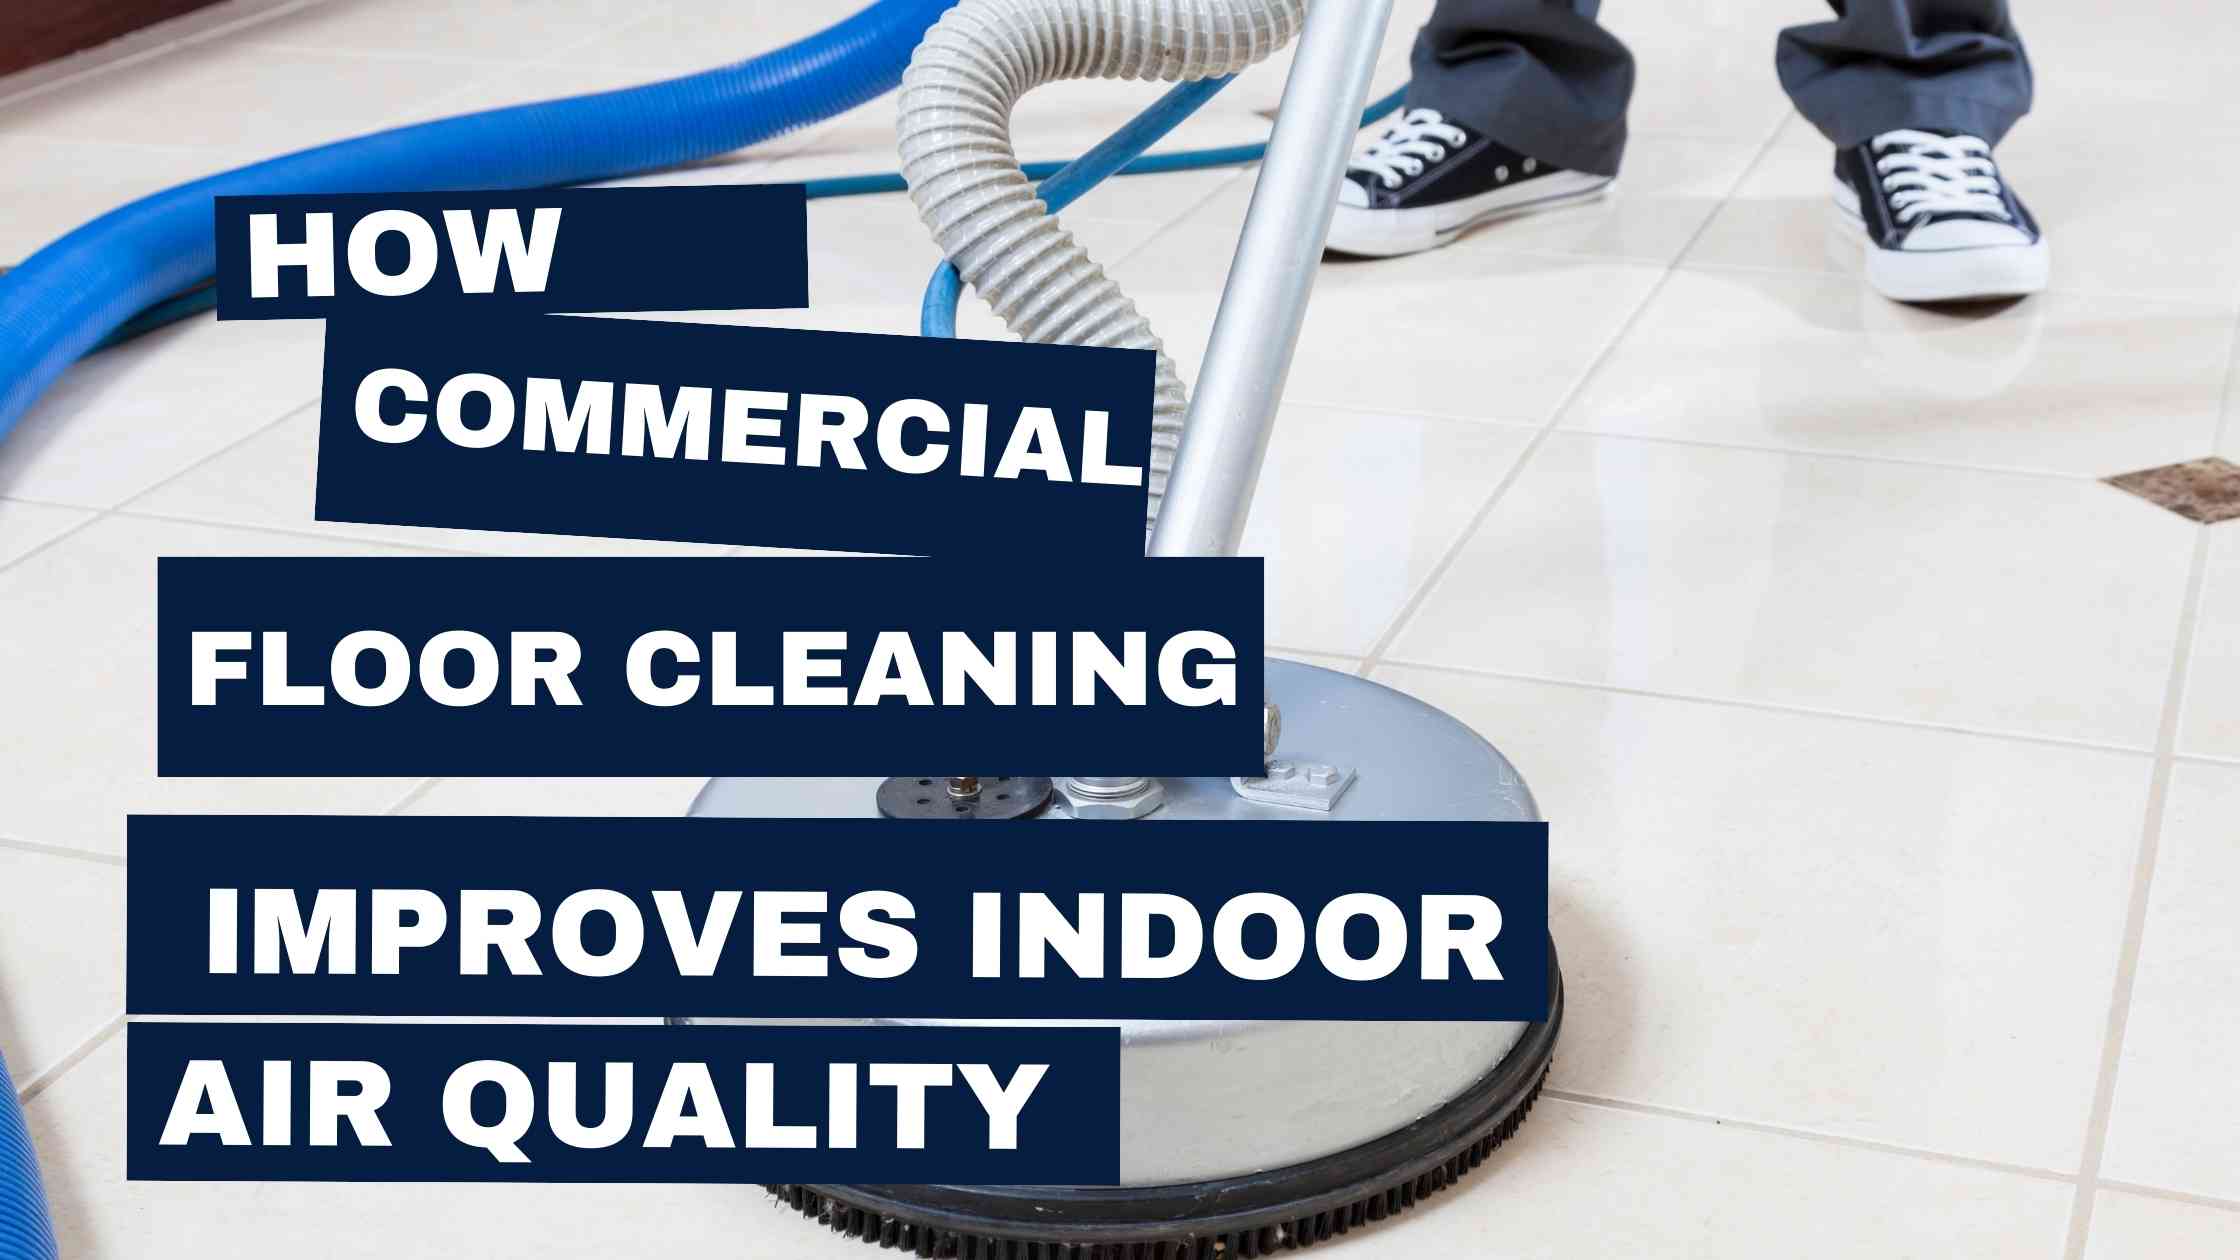 Commercial floor cleaning and indoor air quality